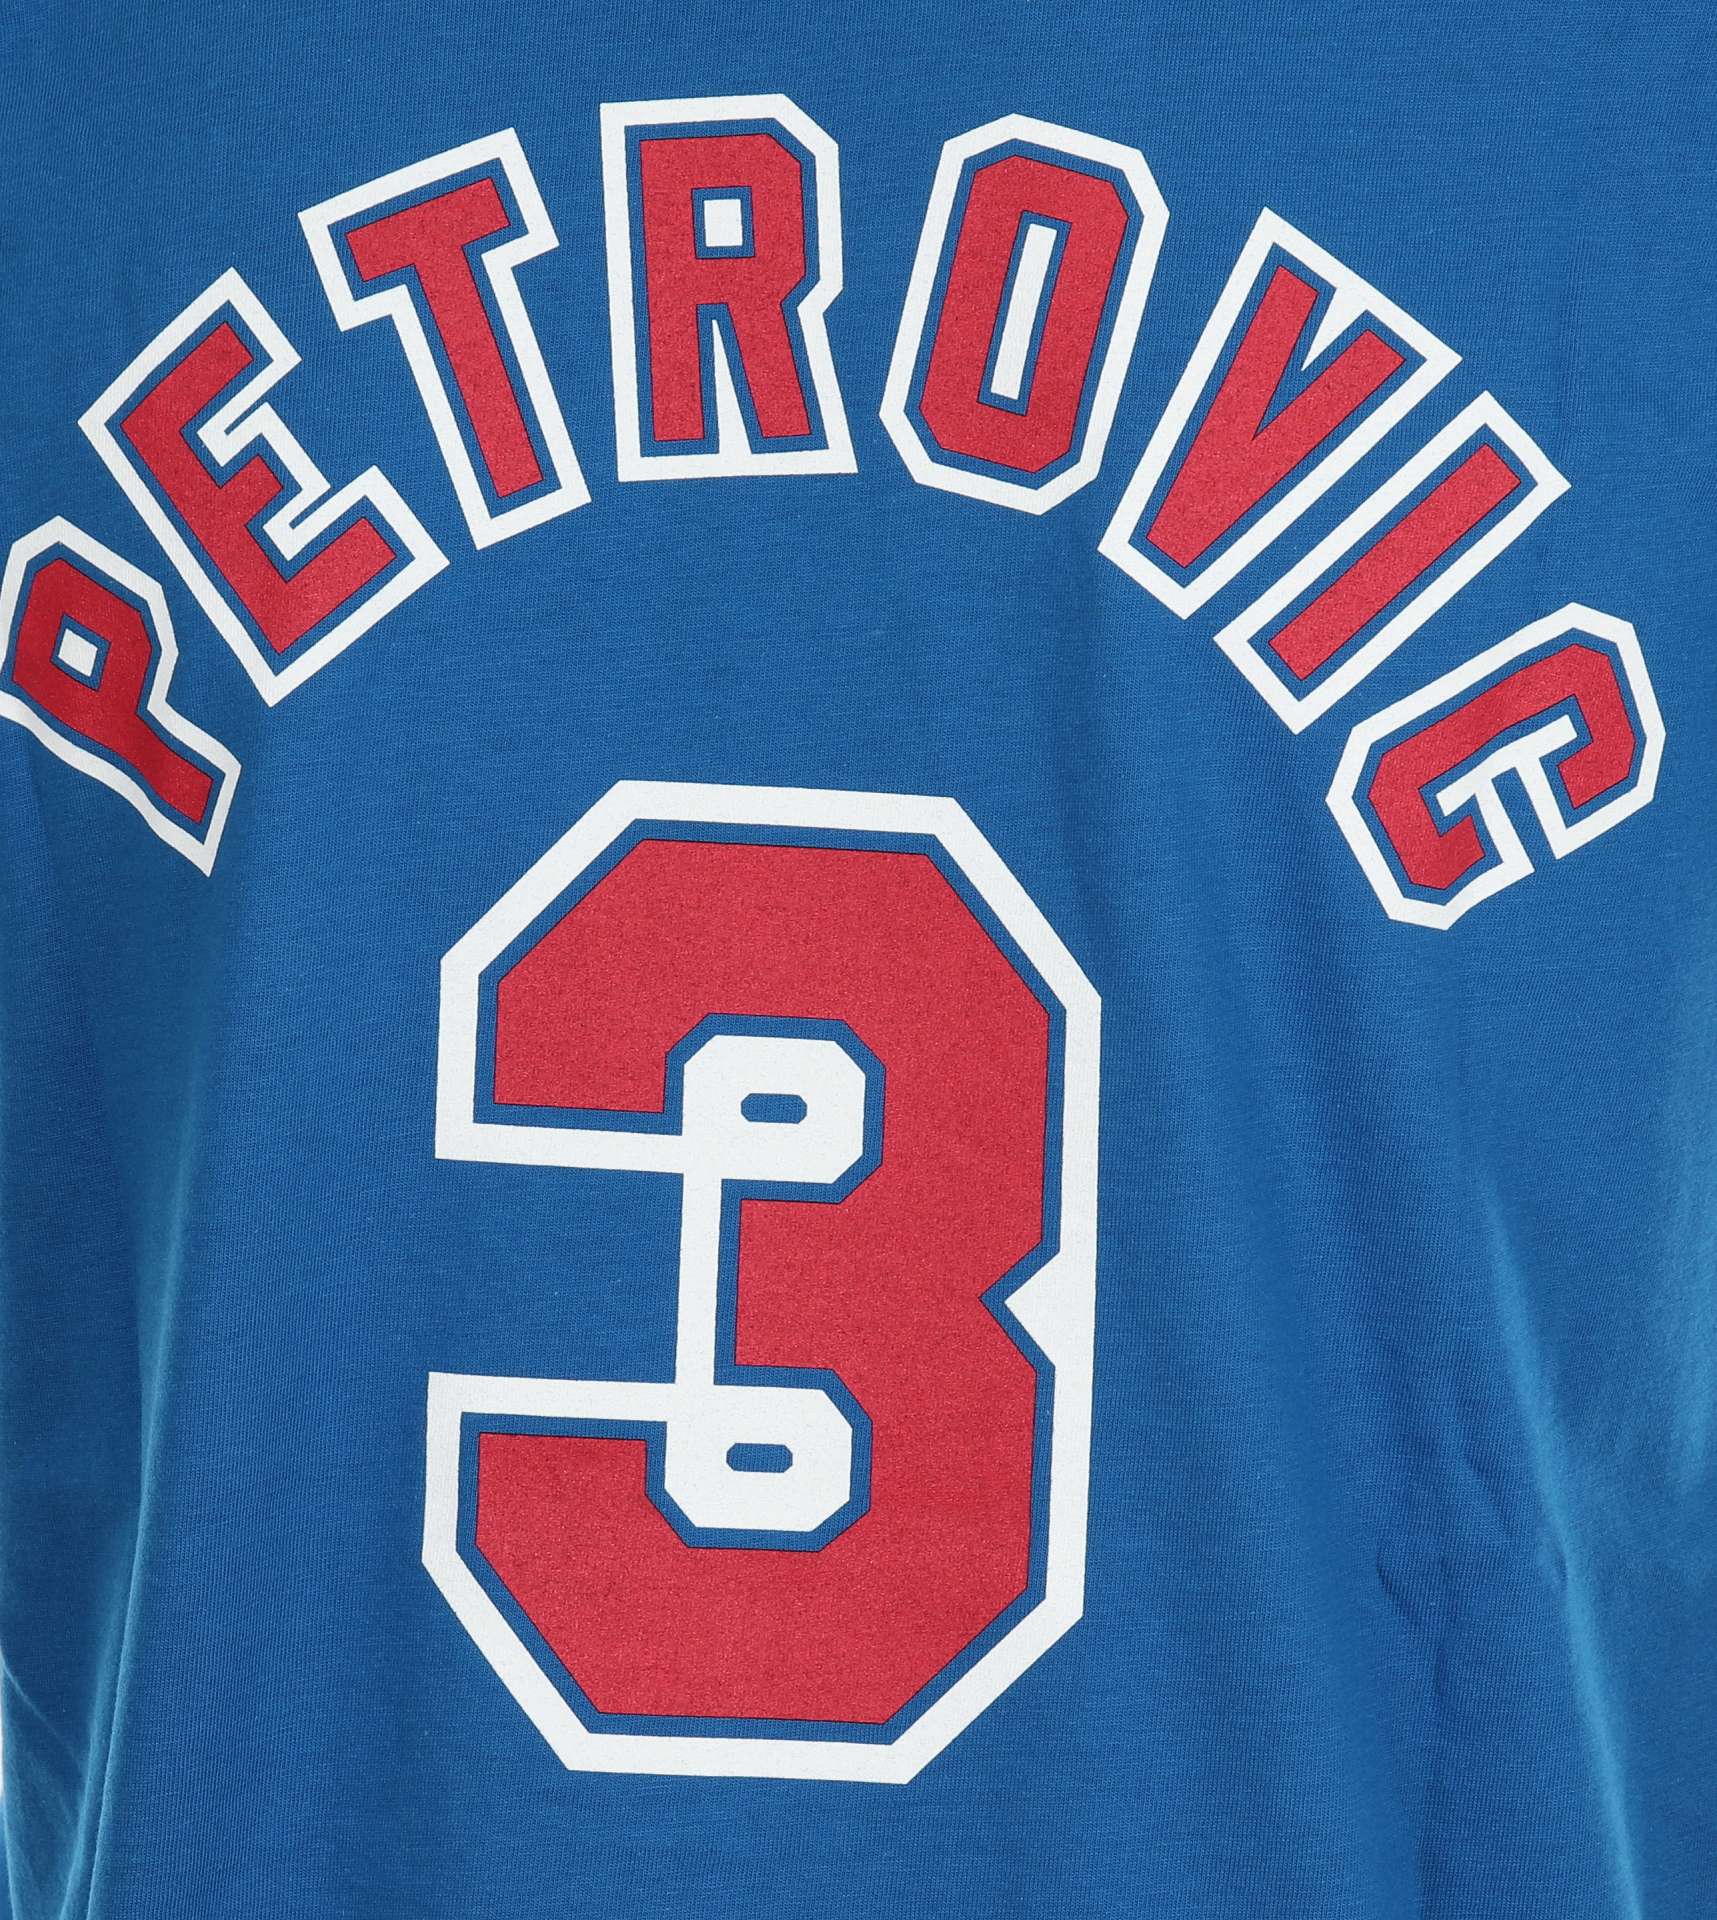 Drazen Petrovic #3 New Jersey Nets Royal NBA Name and Number Tee T-Shirt Mitchell & Ness